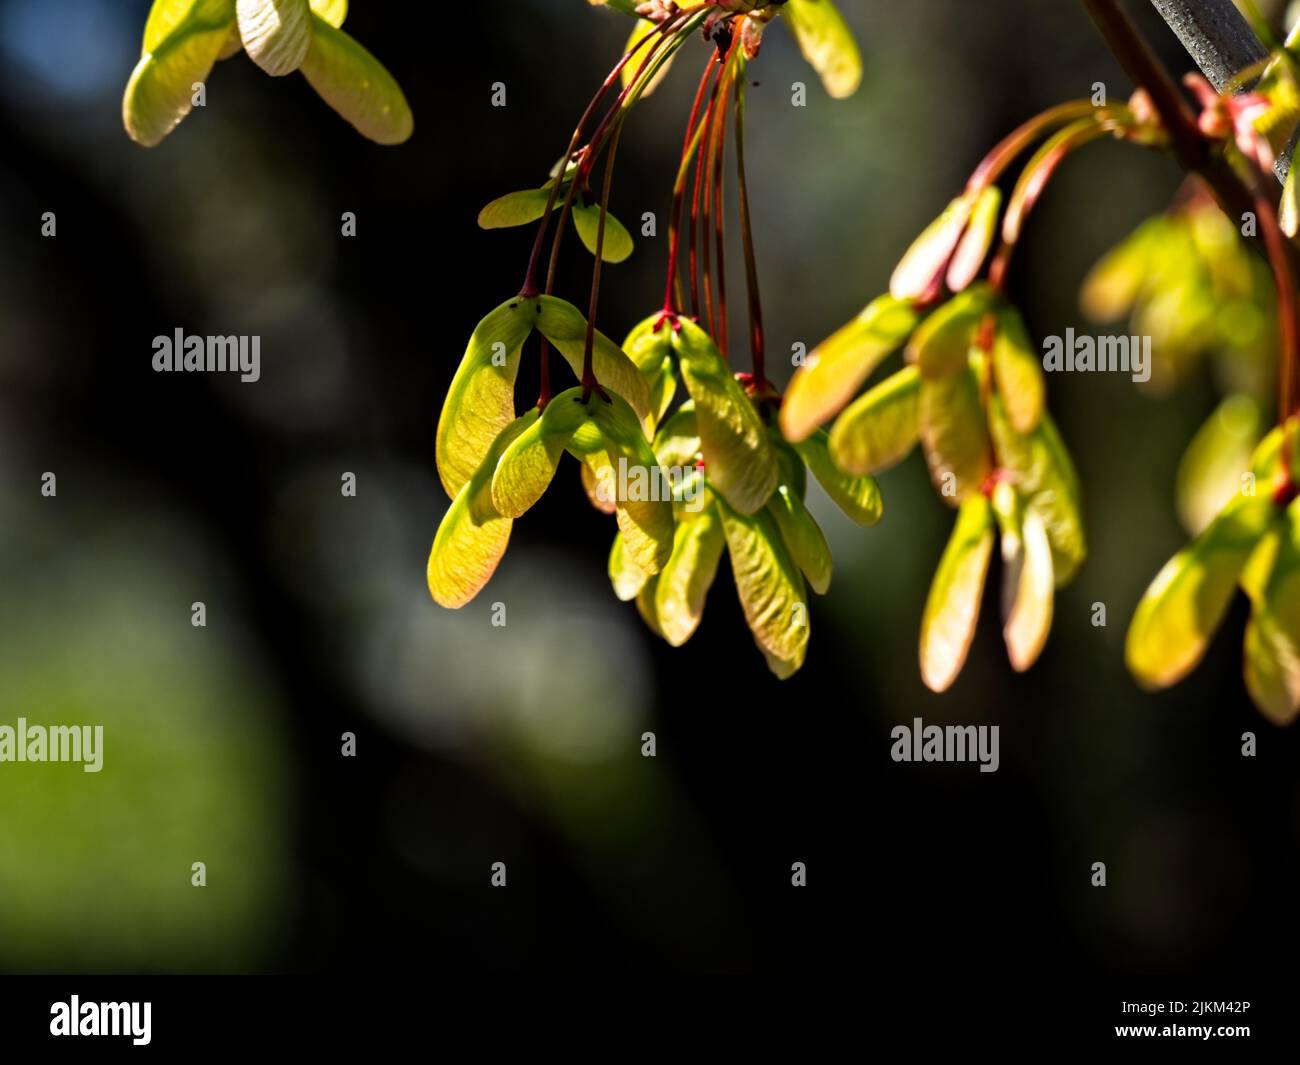 A close-up shot of an ash-leaved maple tree branch in the blurry background. Stock Photo